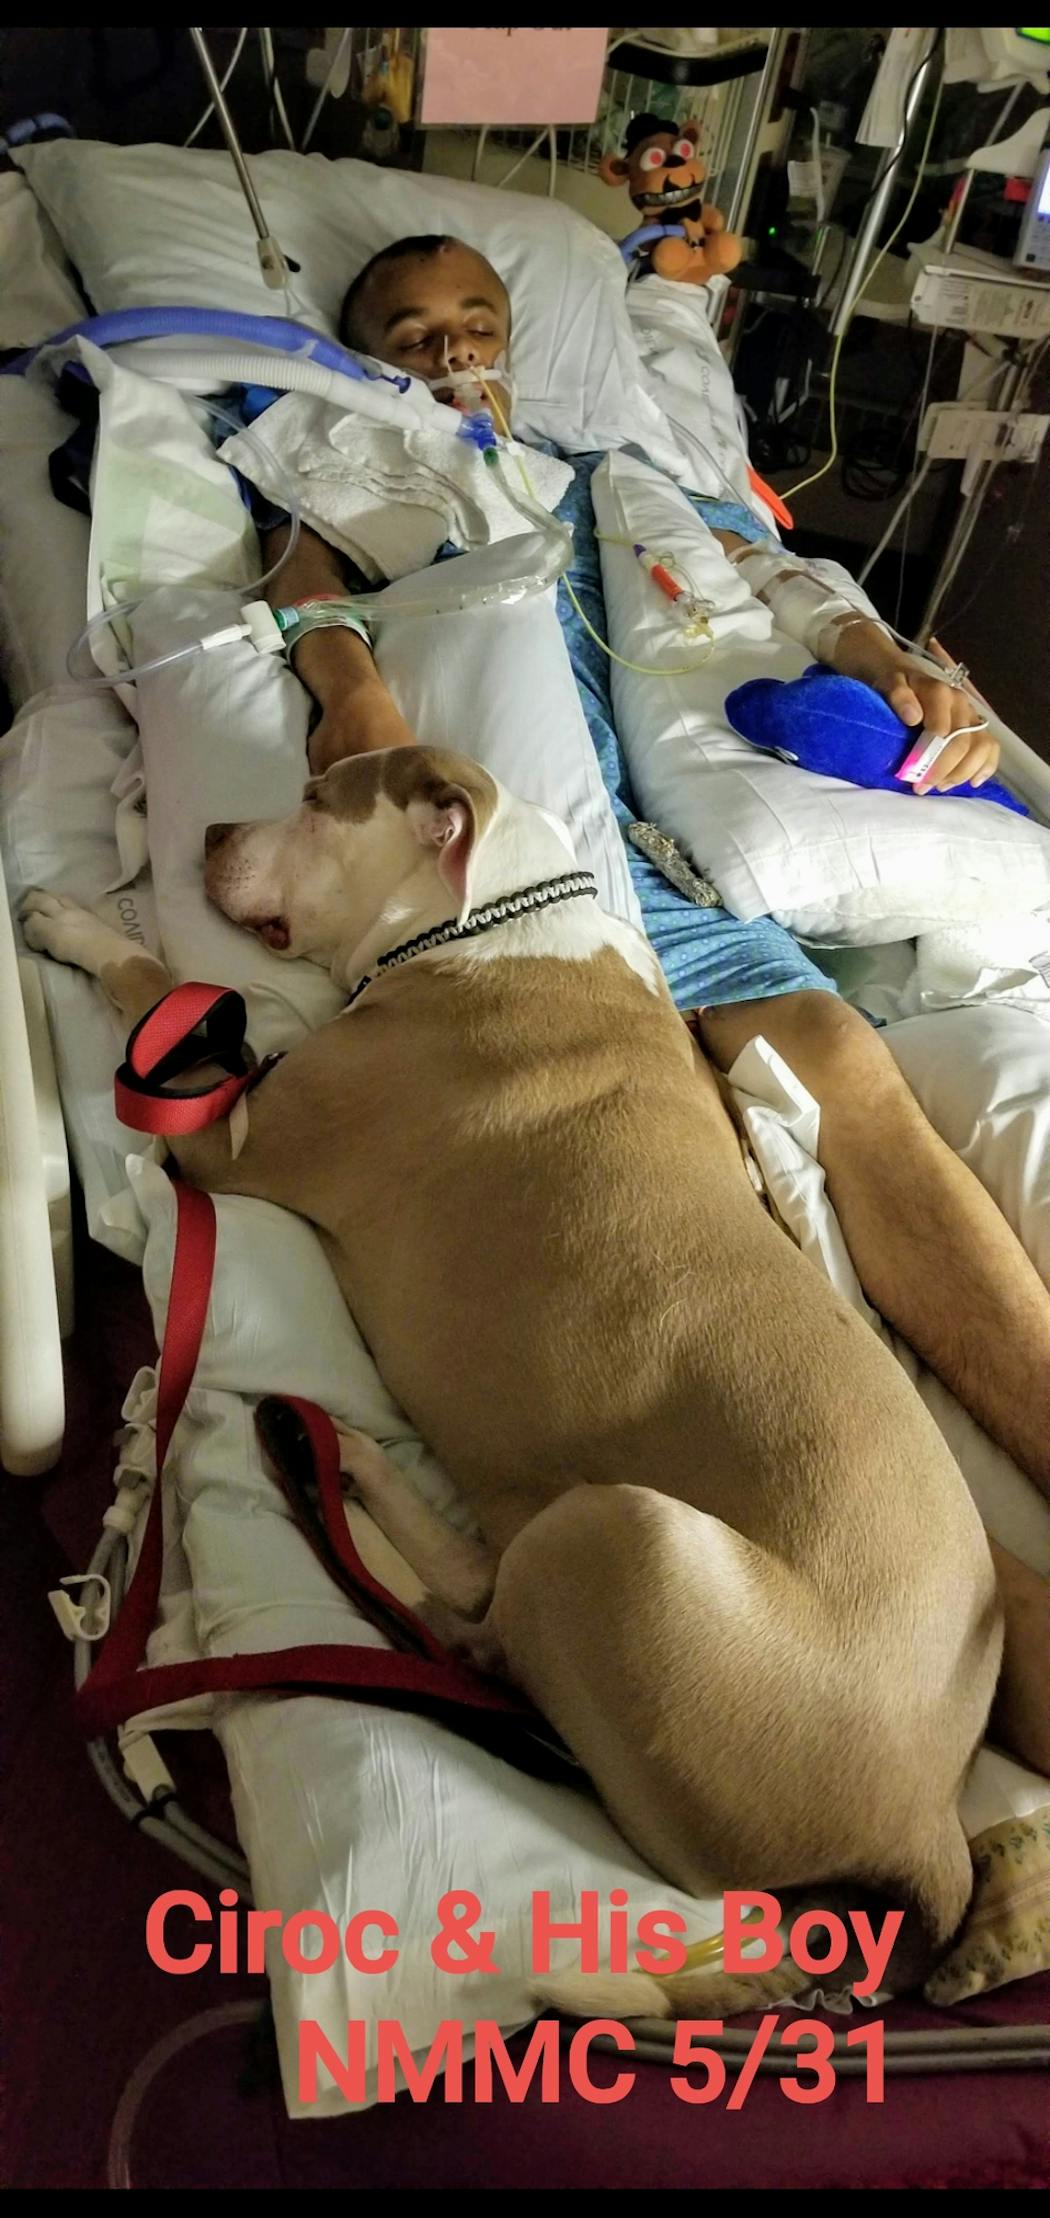 Caleb Livingston’s dog, Ciroc, comforted him in his hospital bed at North Memorial Medical Center after he was shot in the head in May 2019.